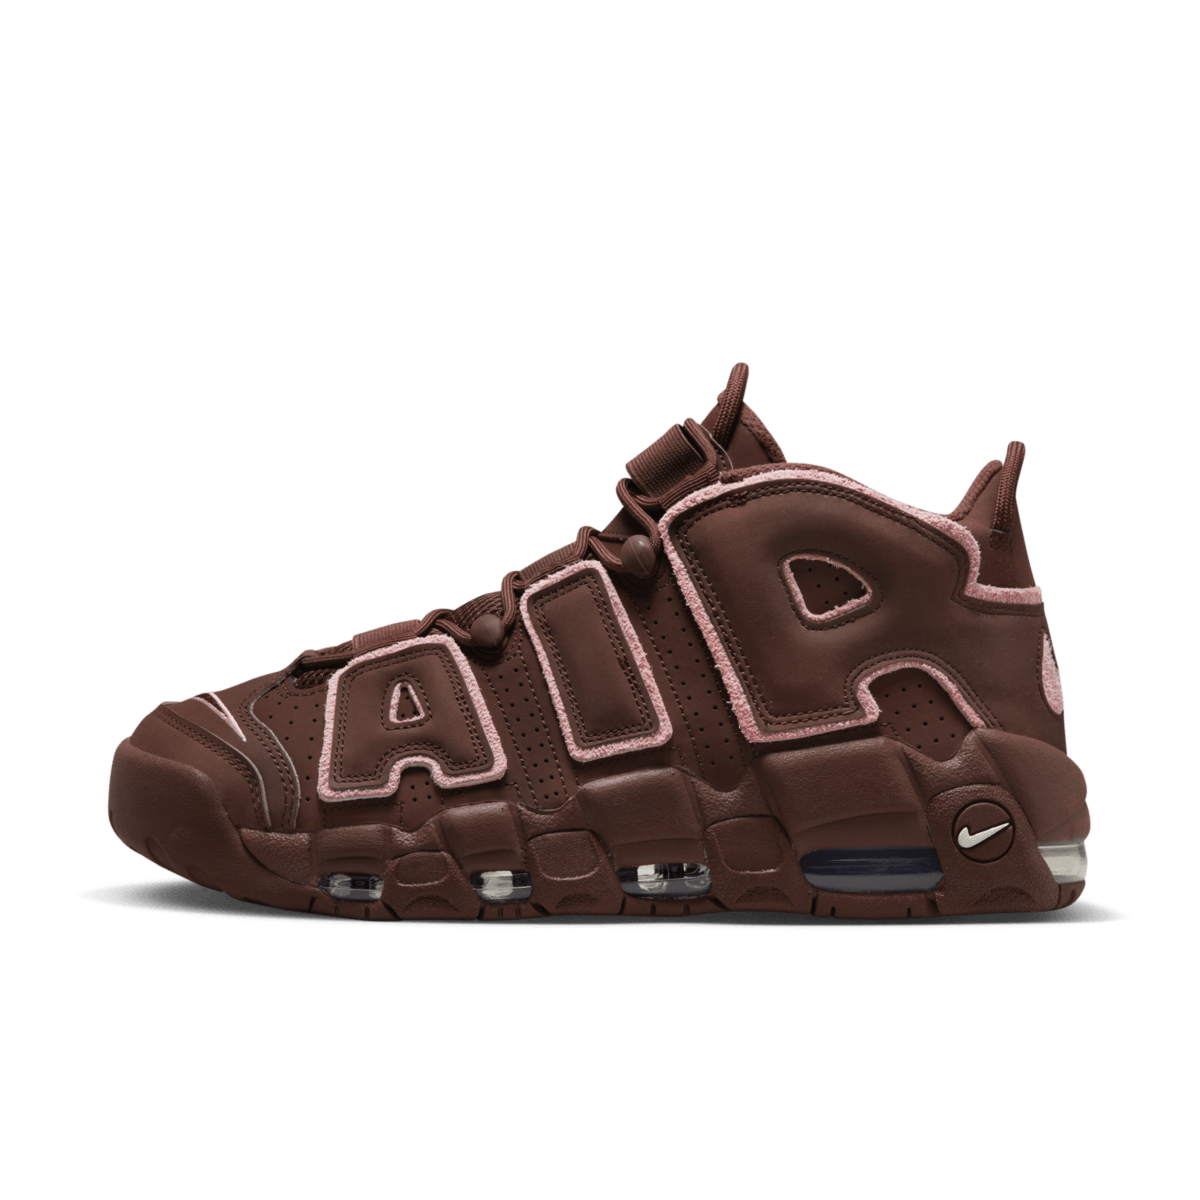 Nike Air More Uptempo “Valentine's Day